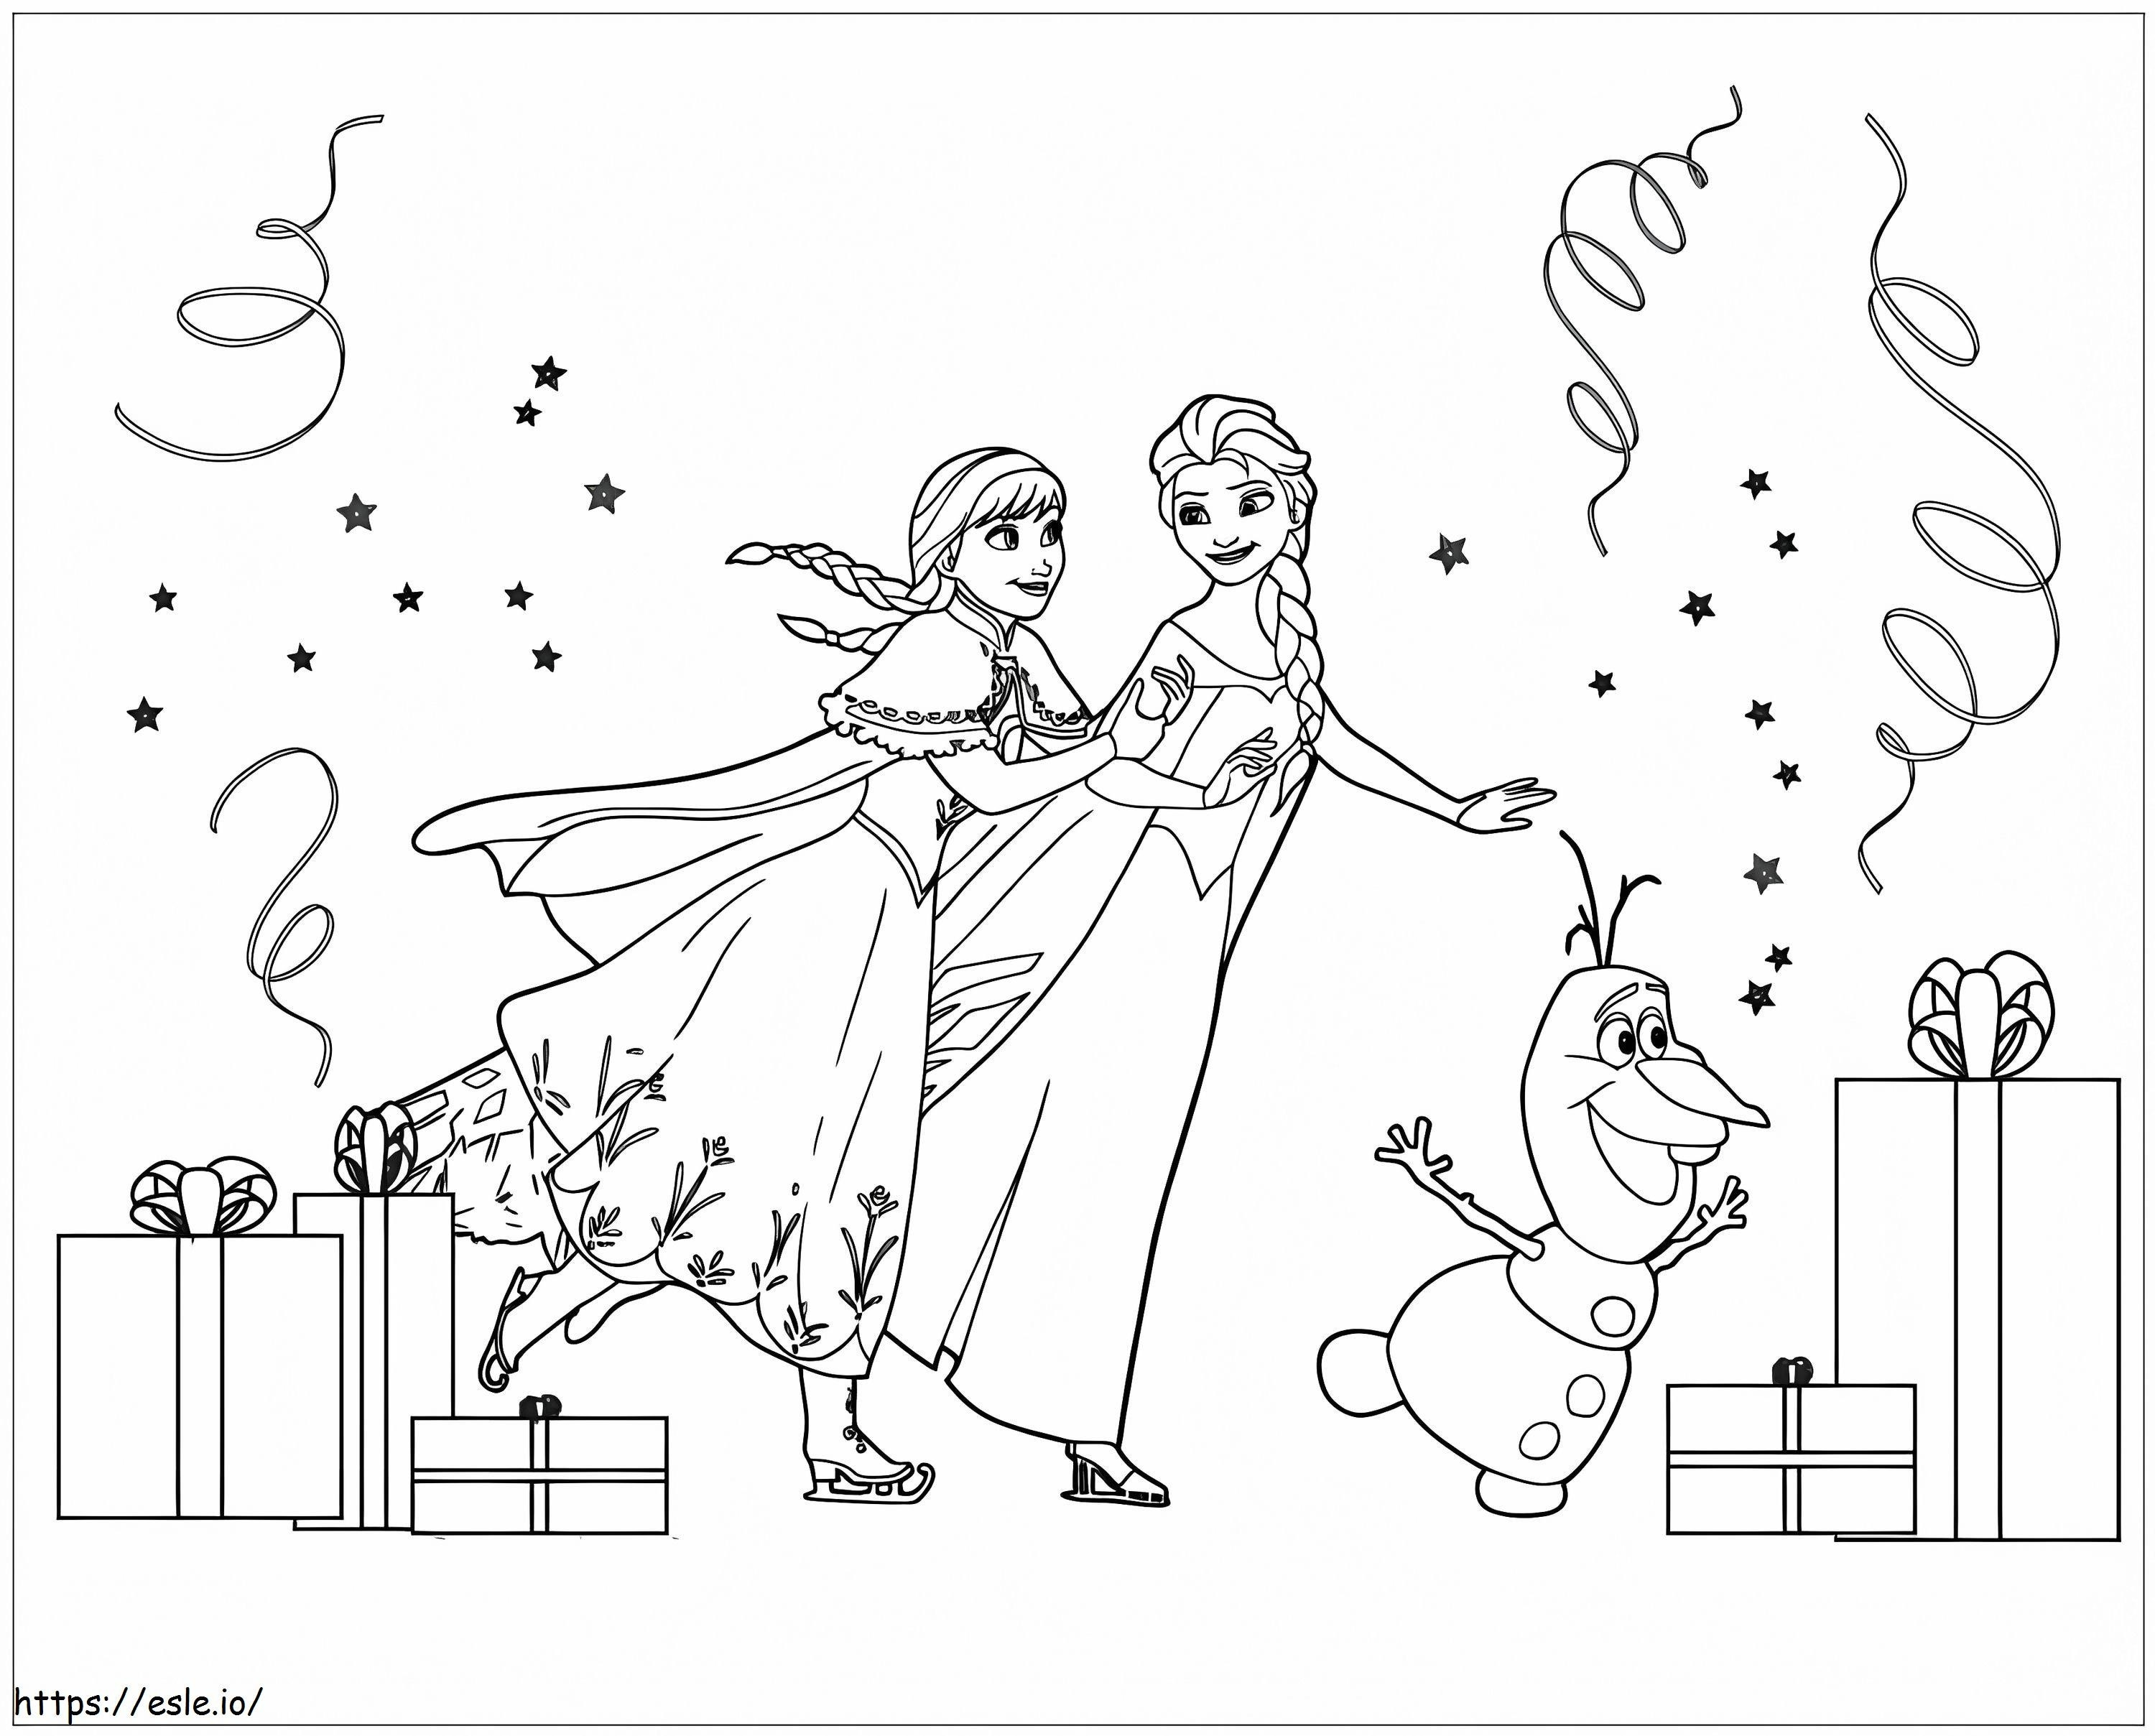 Elsa And Anna Olaf Playing Ice Skating On Their Birthday coloring page